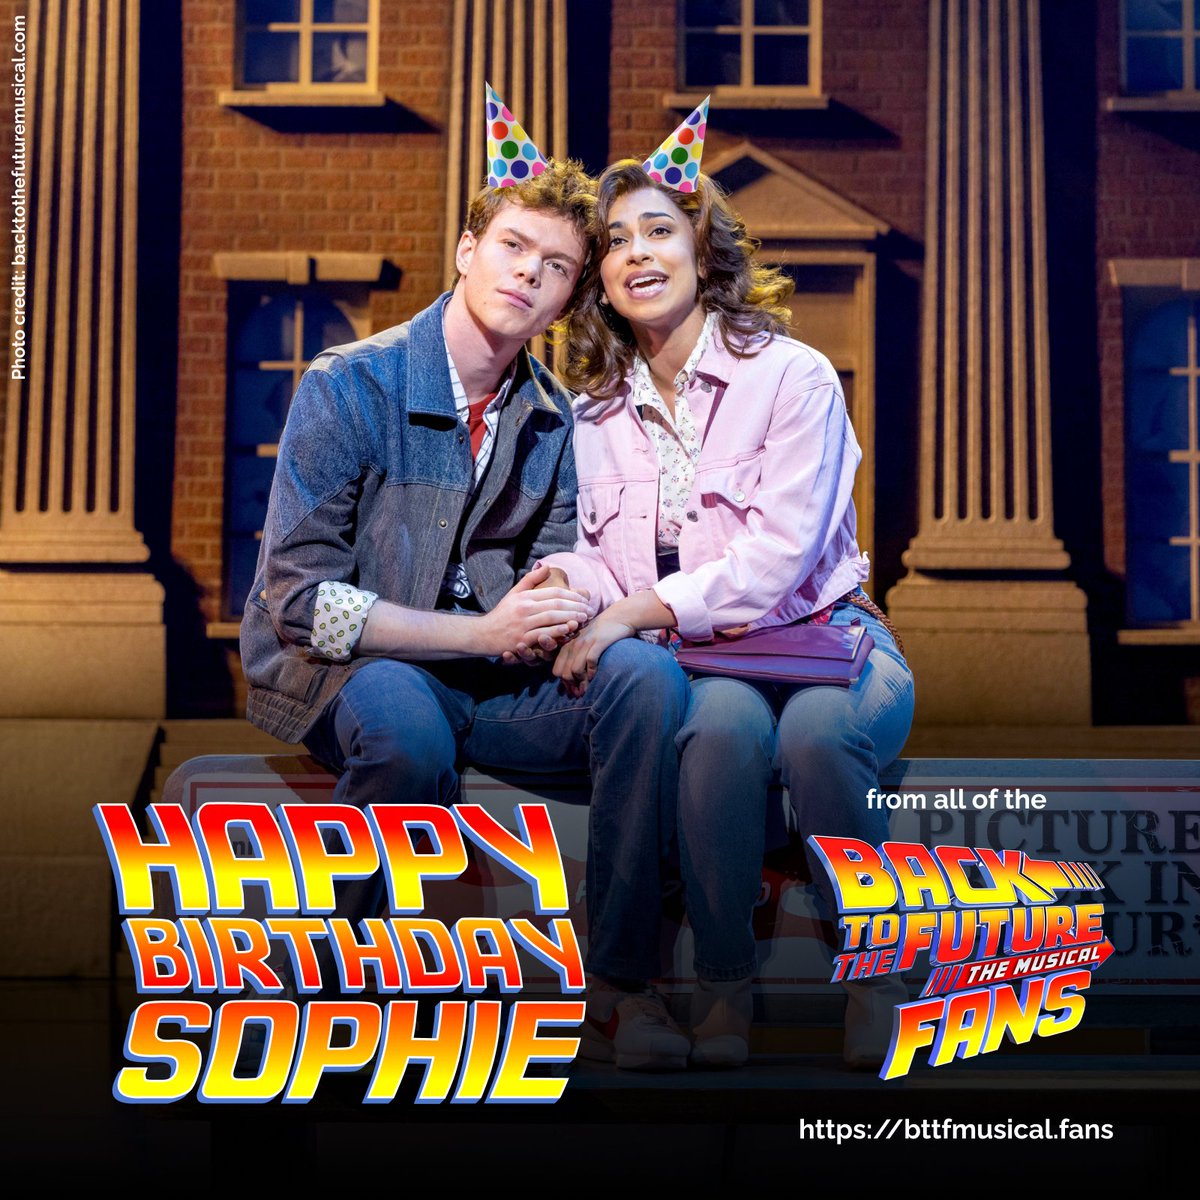 HAPPY BIRTHDAY to @sophienaglik who brings her beautiful voice to #JenniferParker and many other residents of #HillValley in @BTTFmusical 🥳

Have a wonderful day, Sophie!

#bttfmusical #backtothefuturemusical #backtothefuturethemusical #bttf #backtothefuture #westend #musical